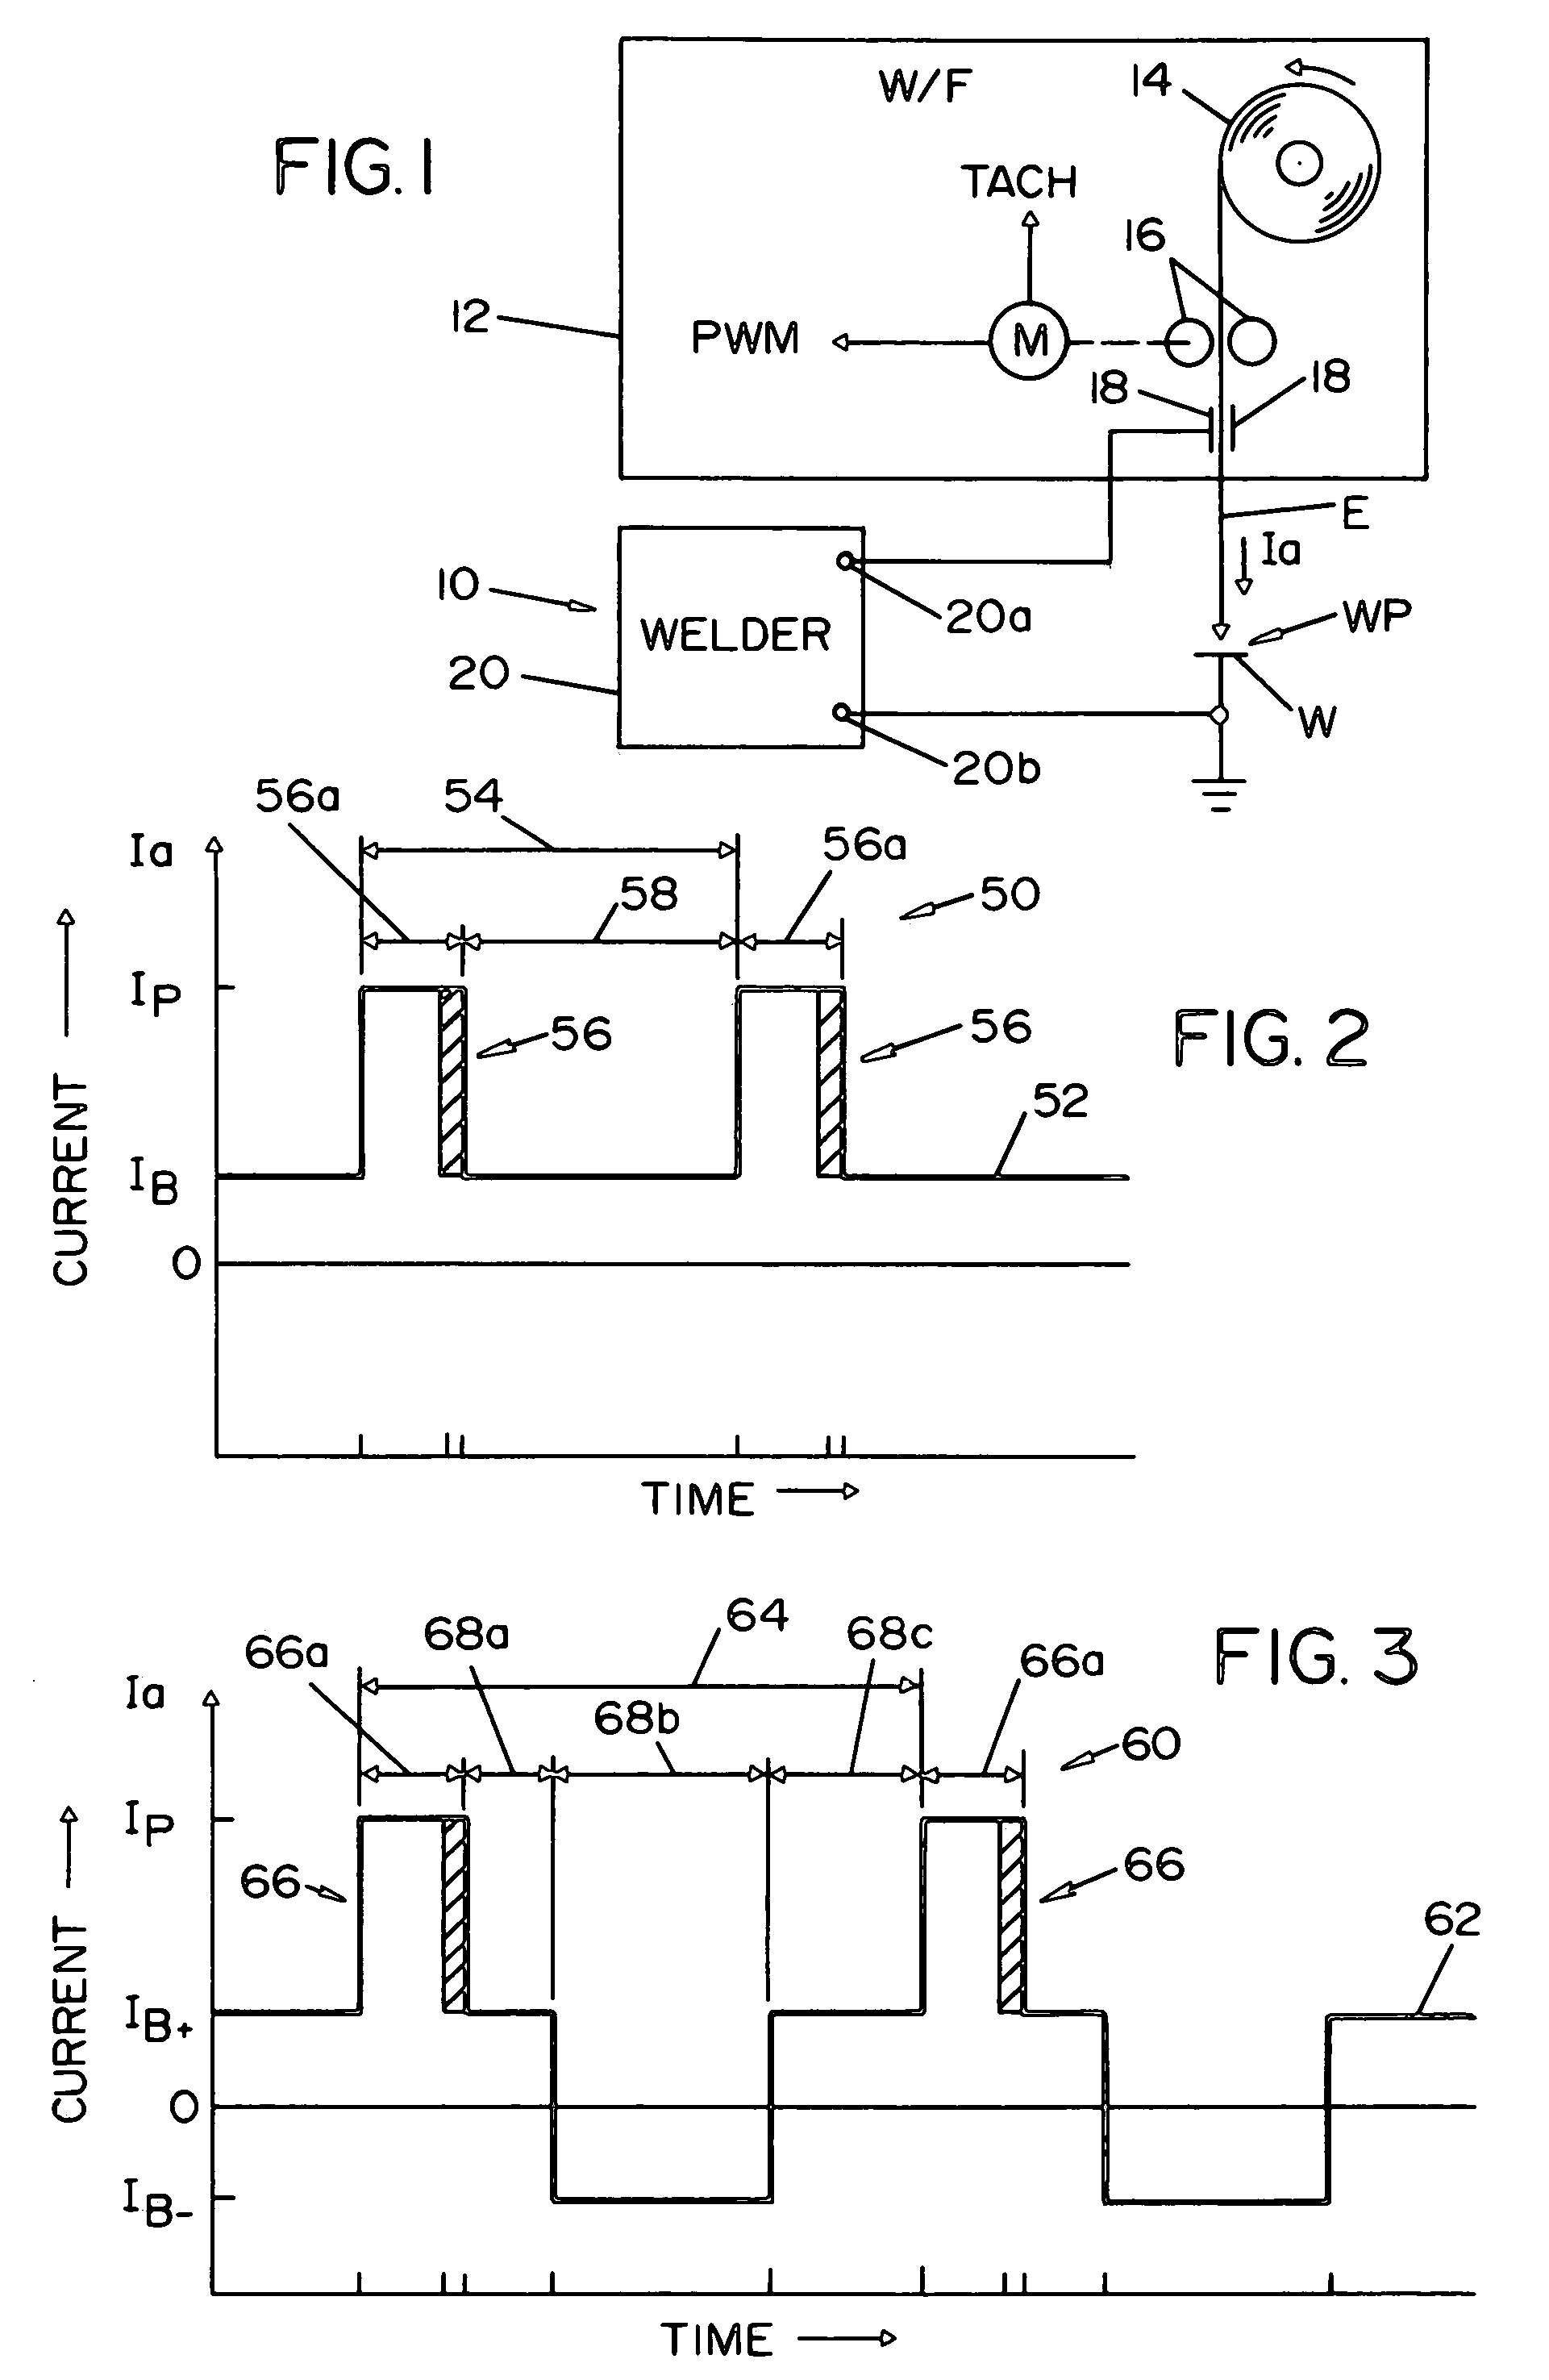 System and method for pulse welding